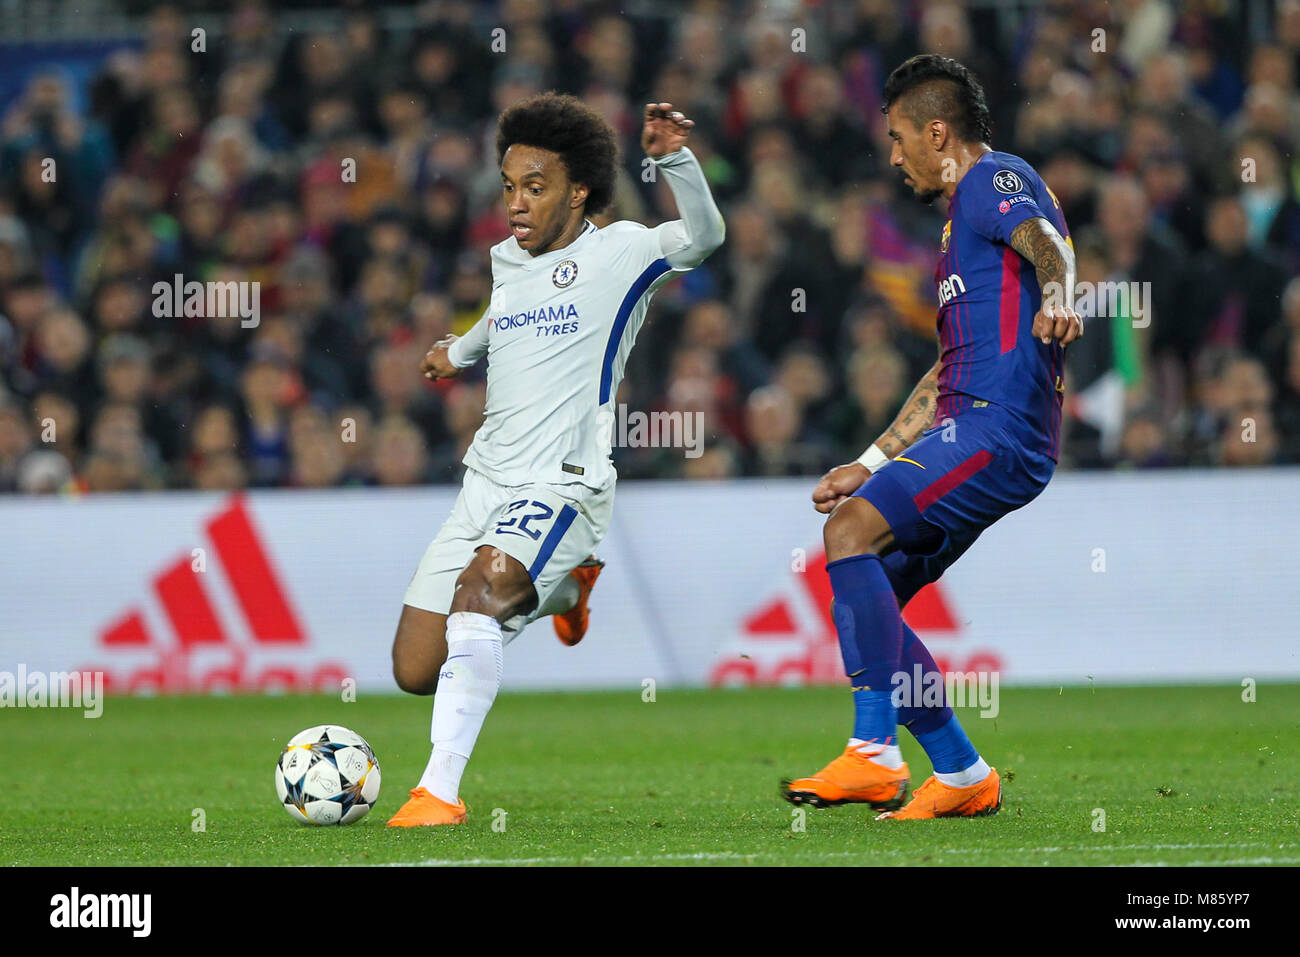 Barcelona, Spain. 14th March 2018; Willian, Chelsea FC player in action with Paulinho, #15 player of FC Barcelona during the 2017/2018 UEFA Champions League Round of 16 game between FC Barcelona and Chelsea at Camp Nou stadium on March 14, 2018 in Barcelona, Spain. Credit: UKKO Images/Alamy Live News Stock Photo